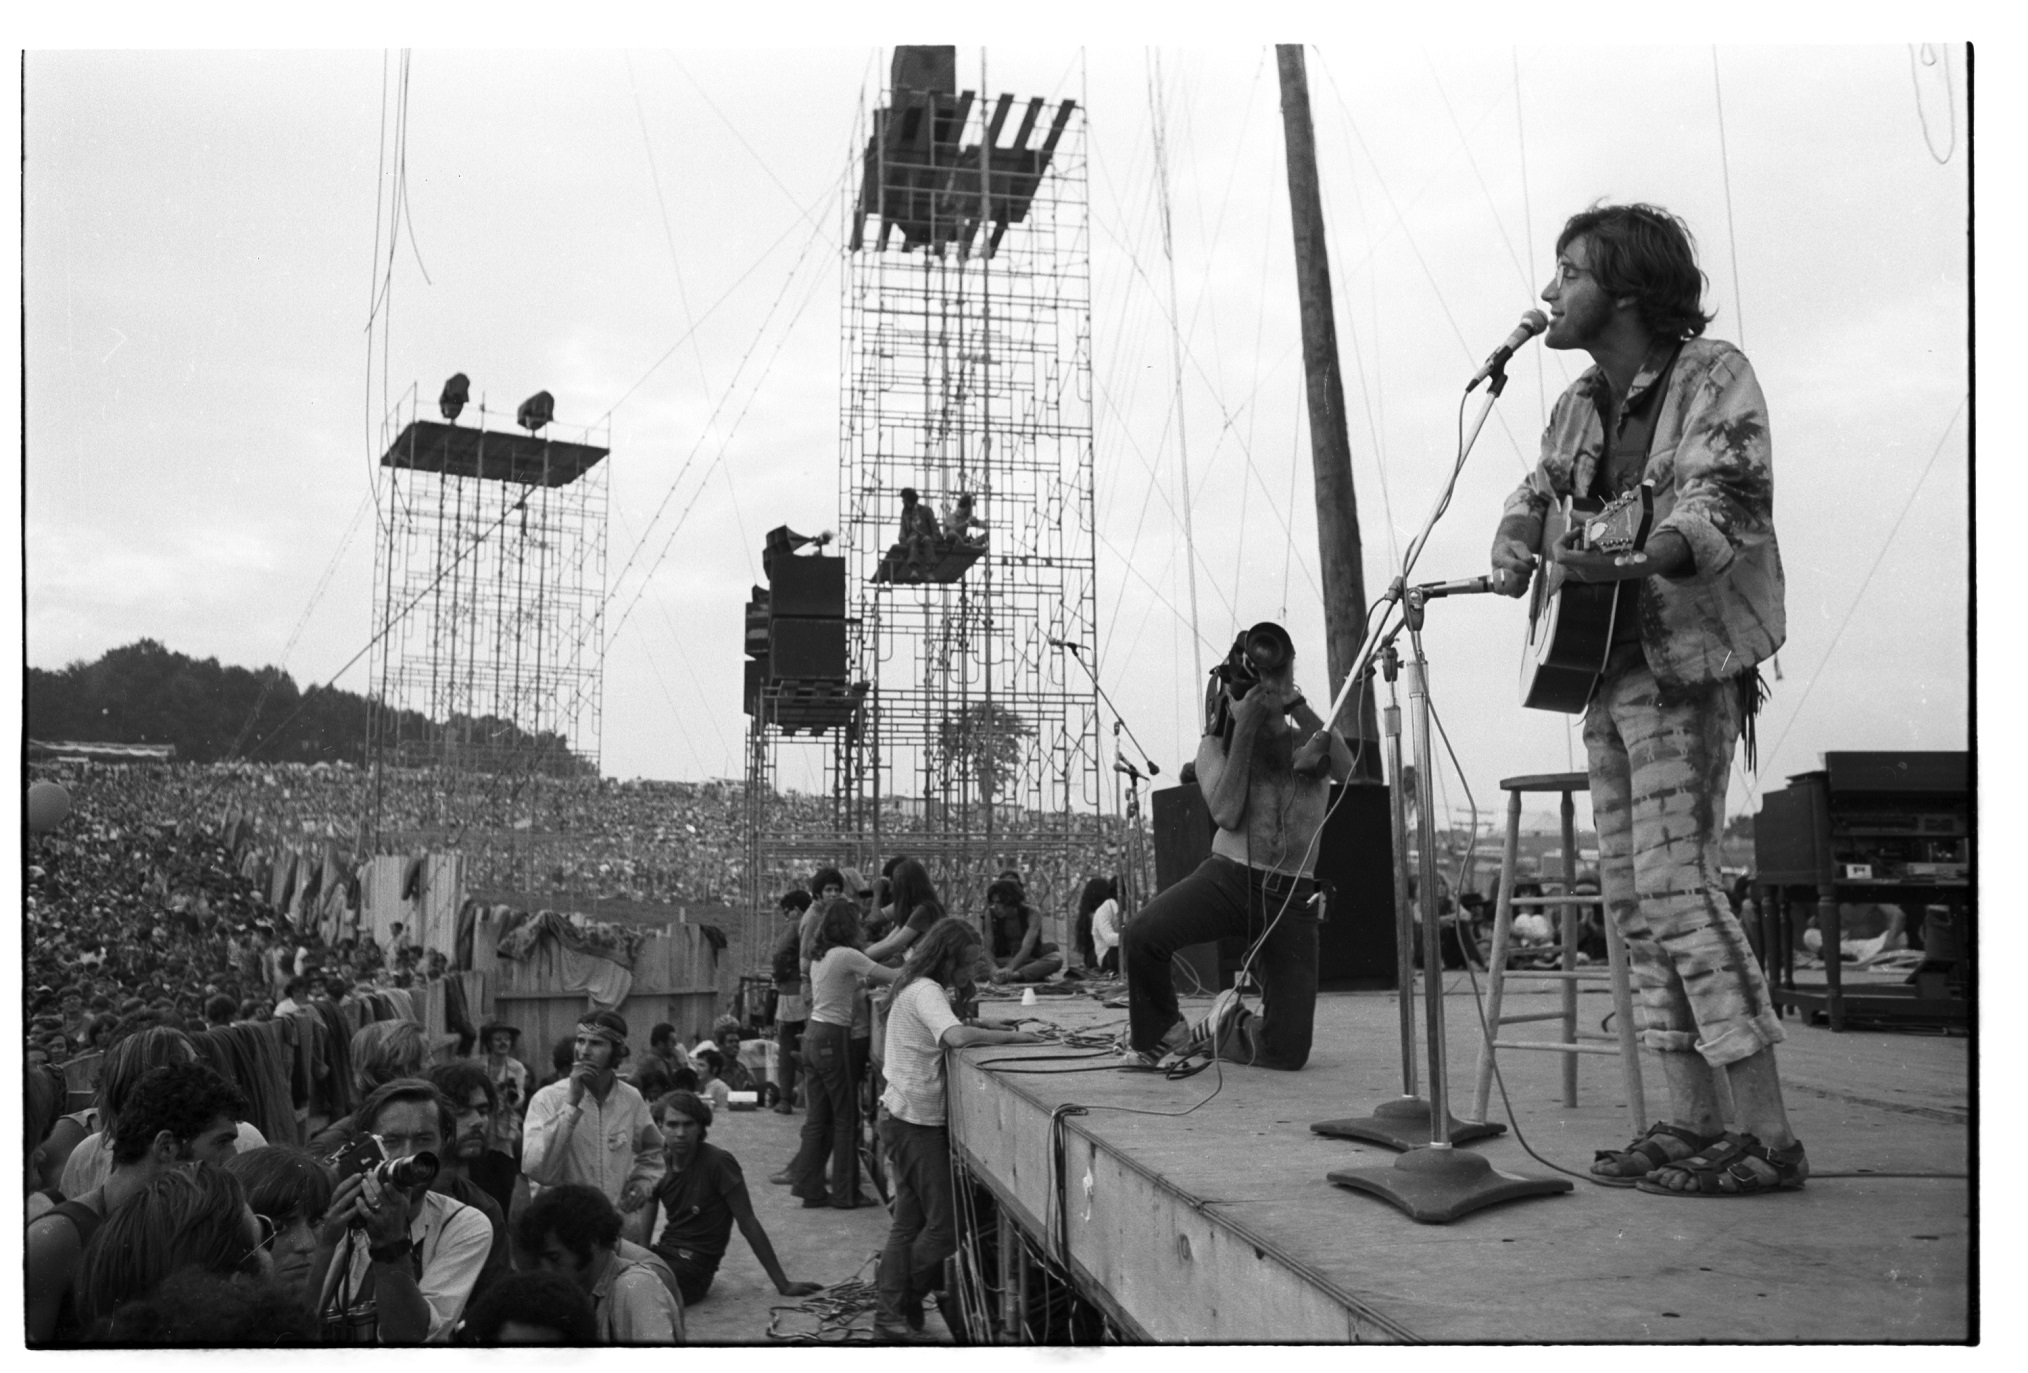 Three Days That a Generation' Looks Woodstock's Audience